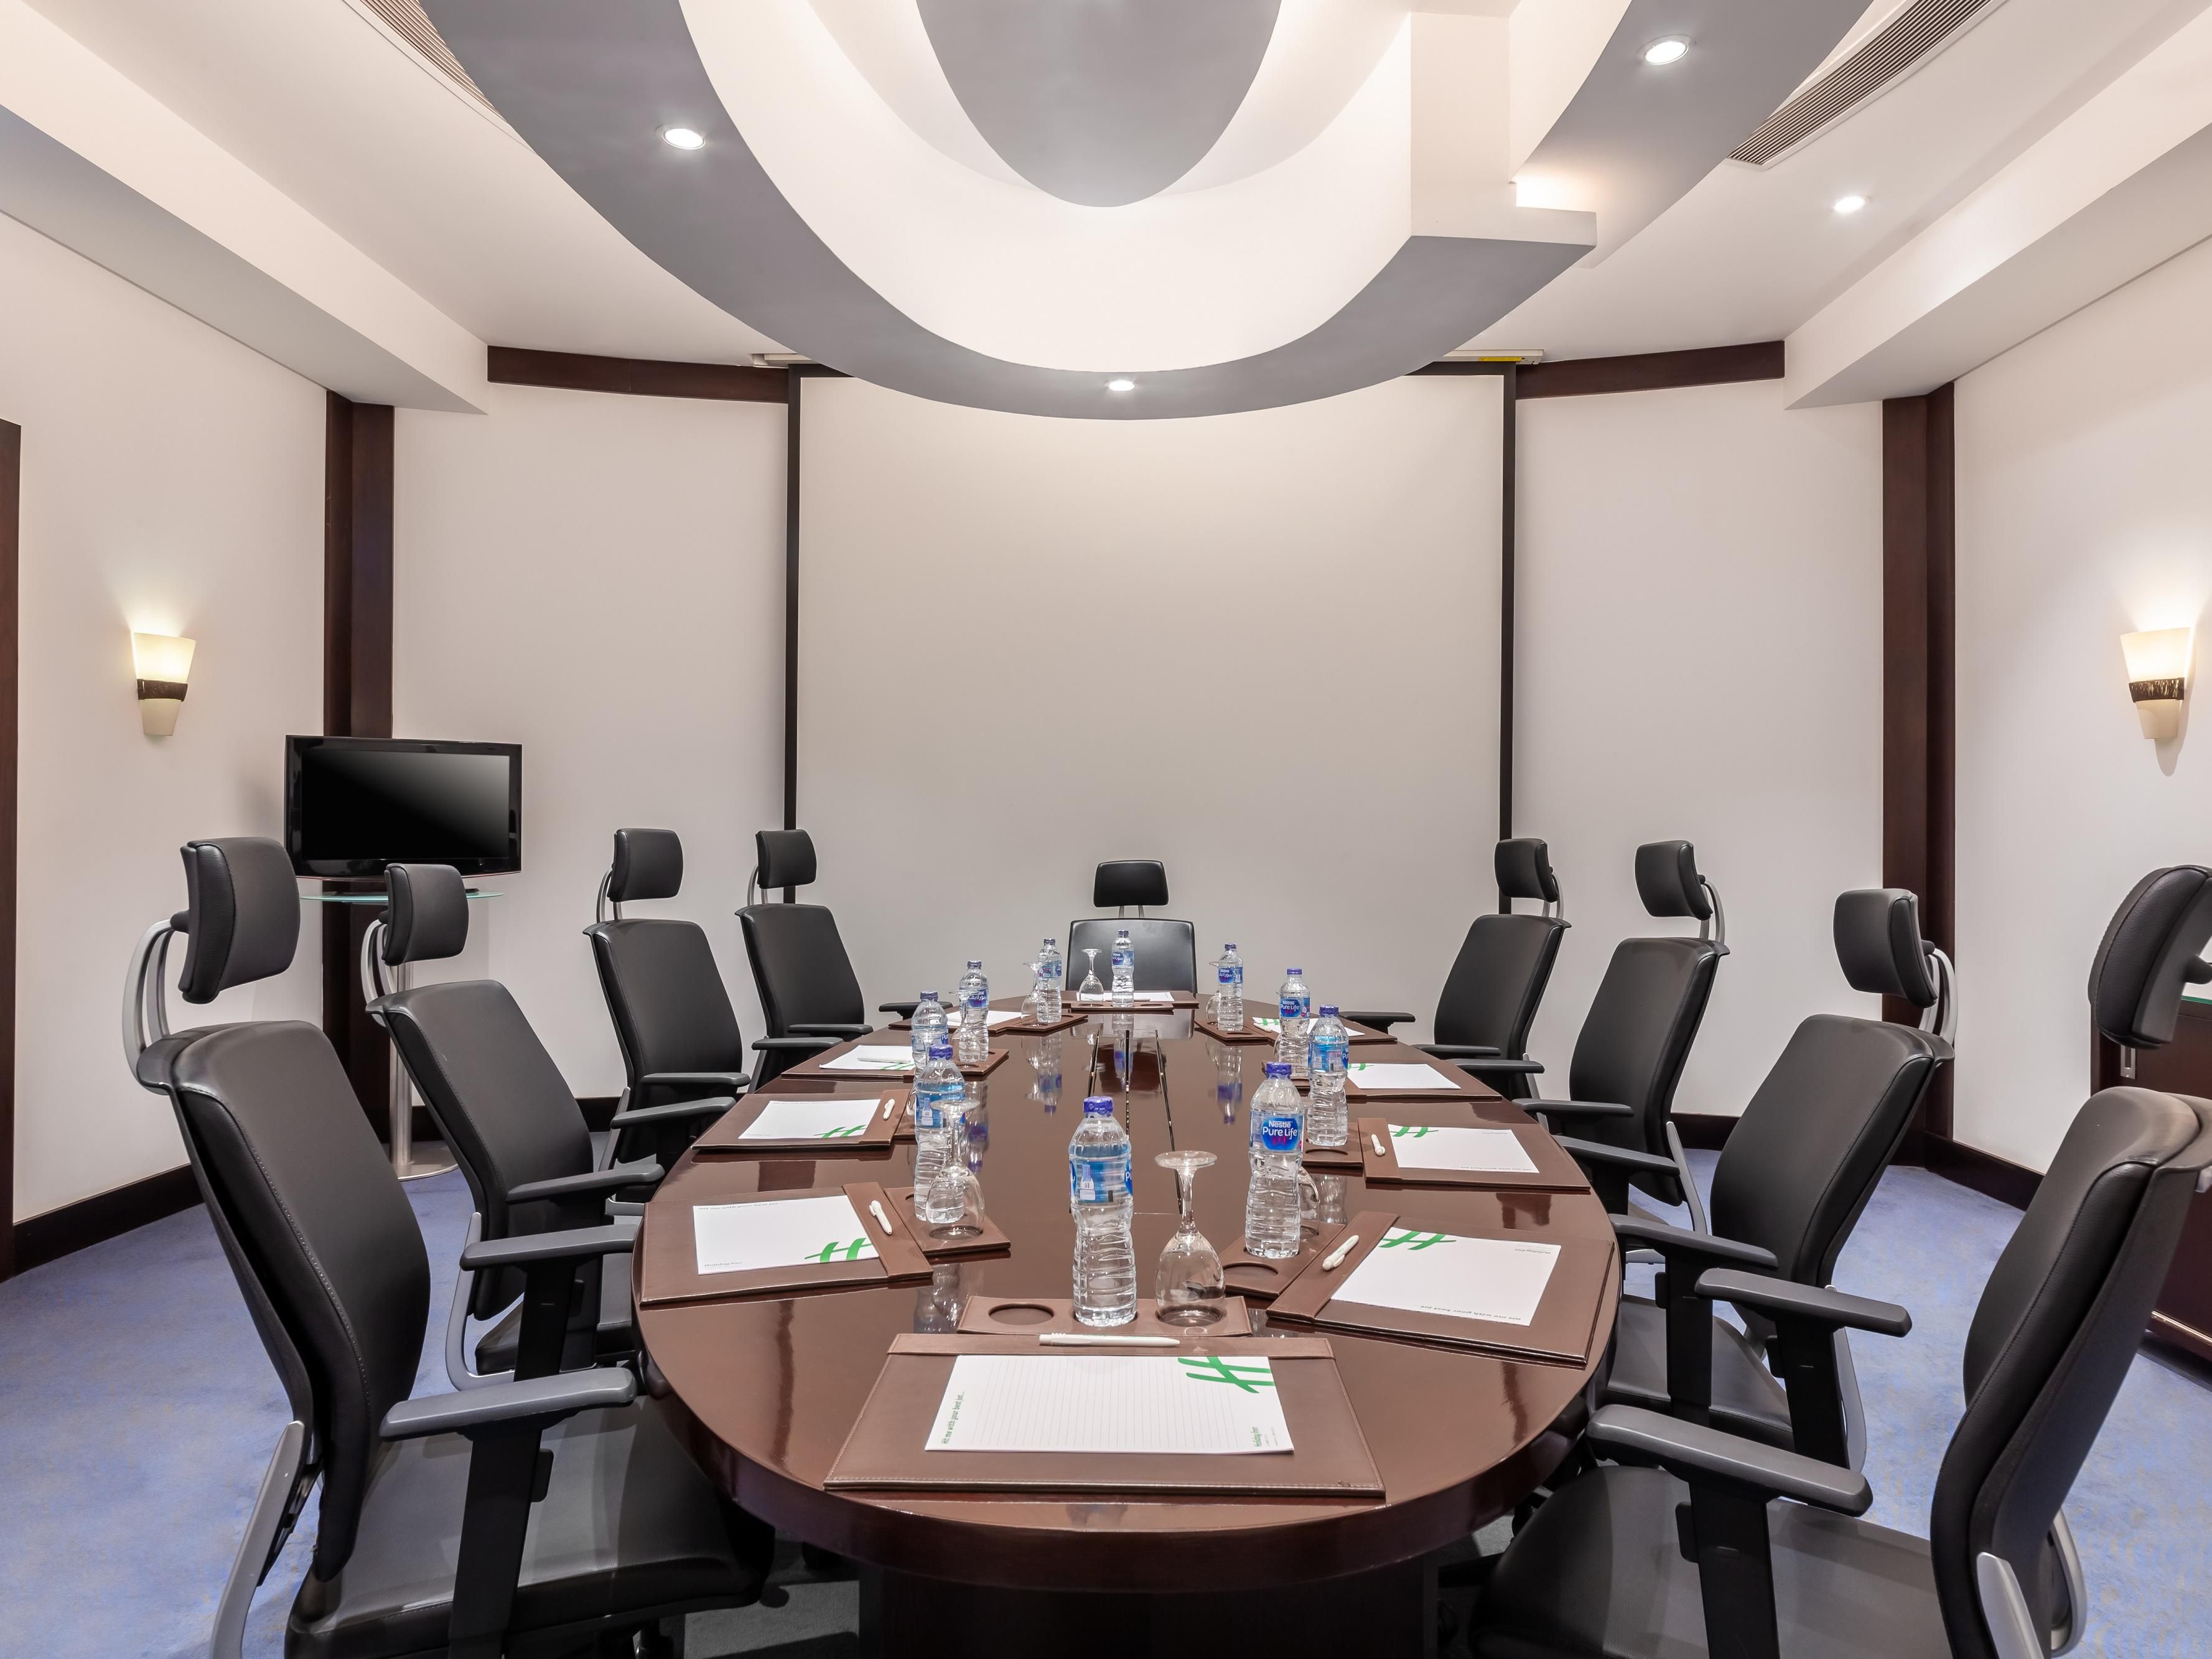 Cozy meetings, extensive seminars or even trainings and many more, Holiday Inn Cairo Maadi's banquet rooms are there to fulfill all your requests. Our highly equipped 14 meeting rooms with their variety of spaces can serve all your demands, just leave it to our skillful team who will handle everything with professionalism & success 